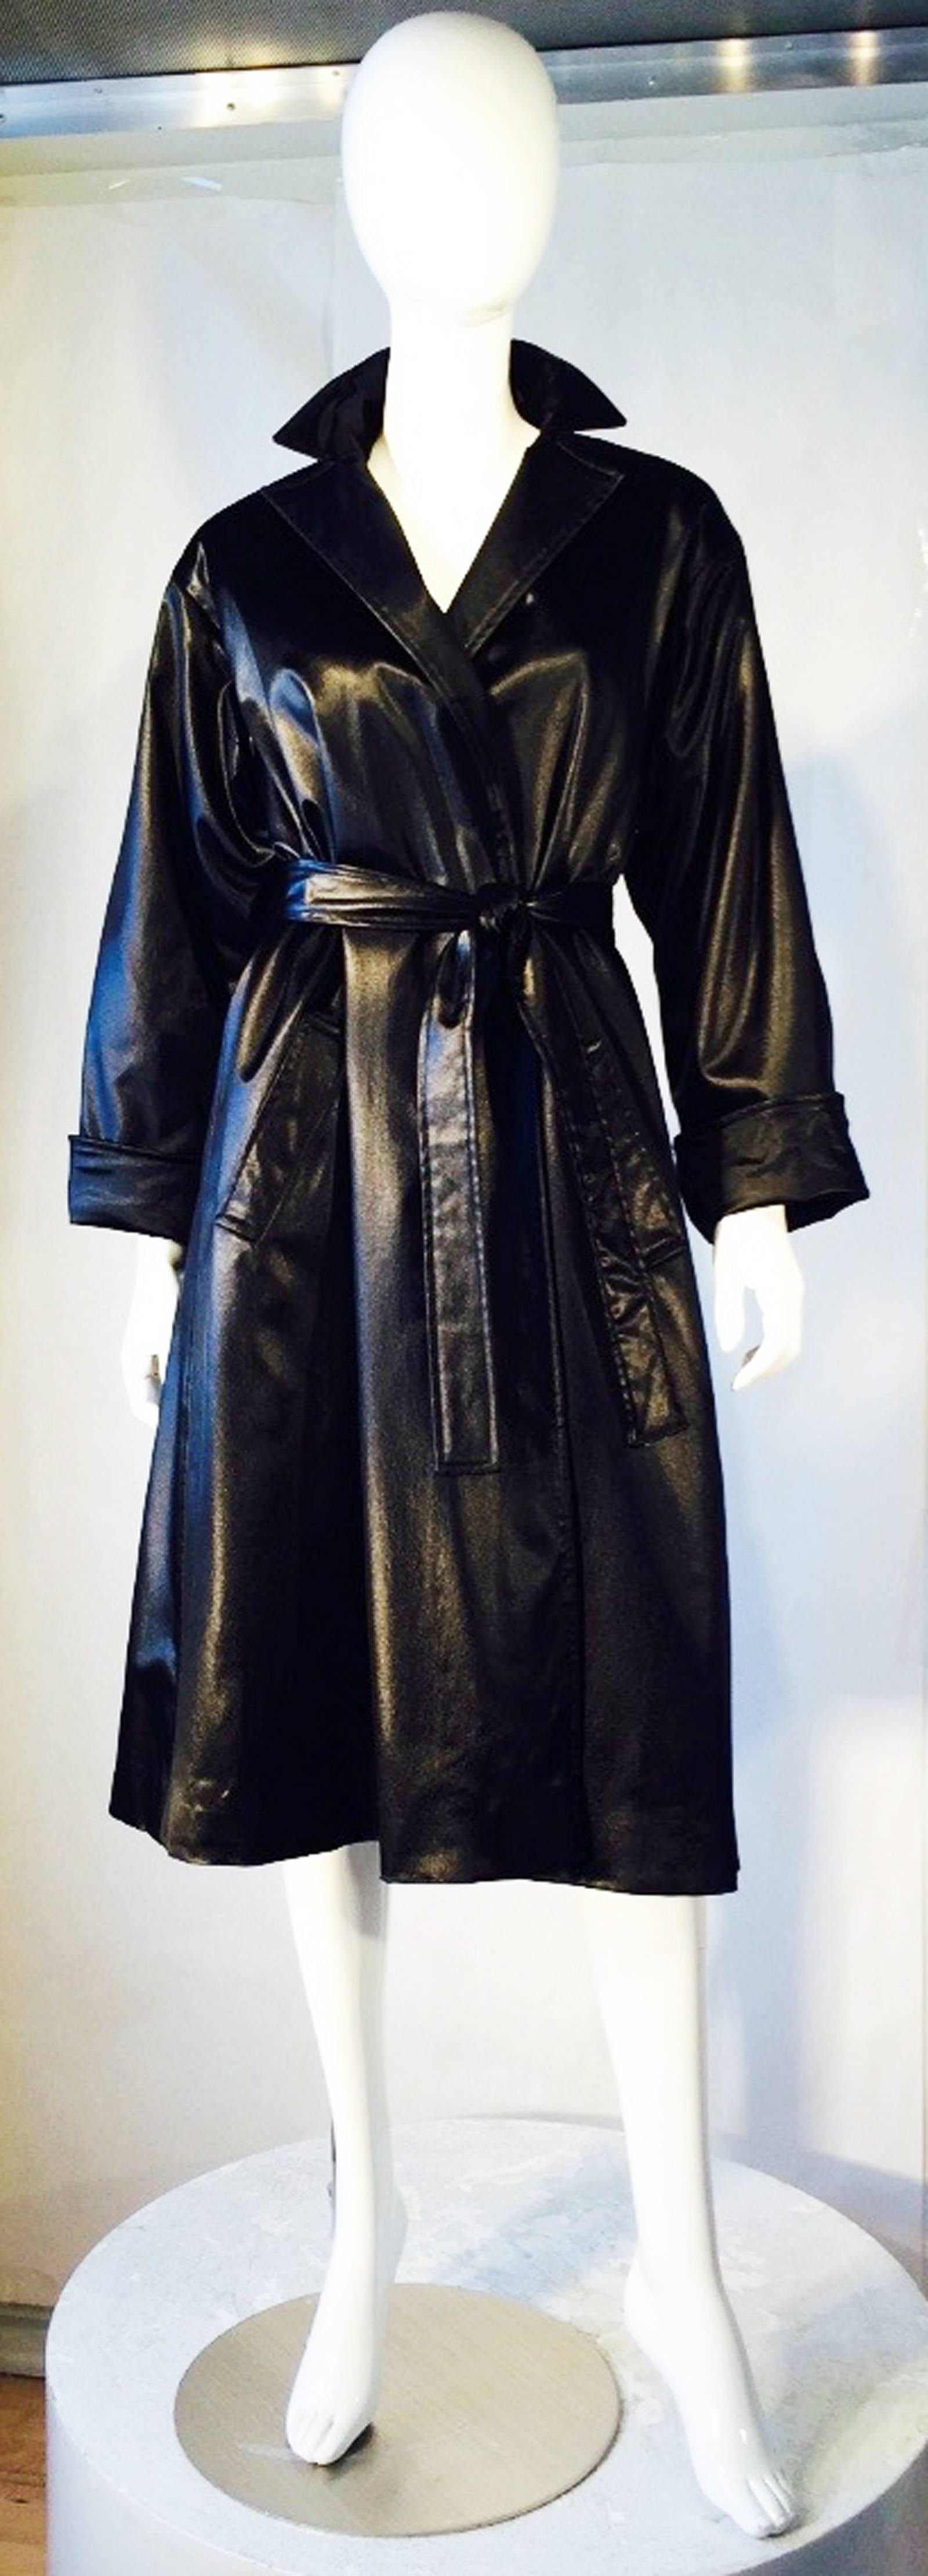 Halston Silk Belted Wrap Coat 1970s In Excellent Condition For Sale In Phoenix, AZ